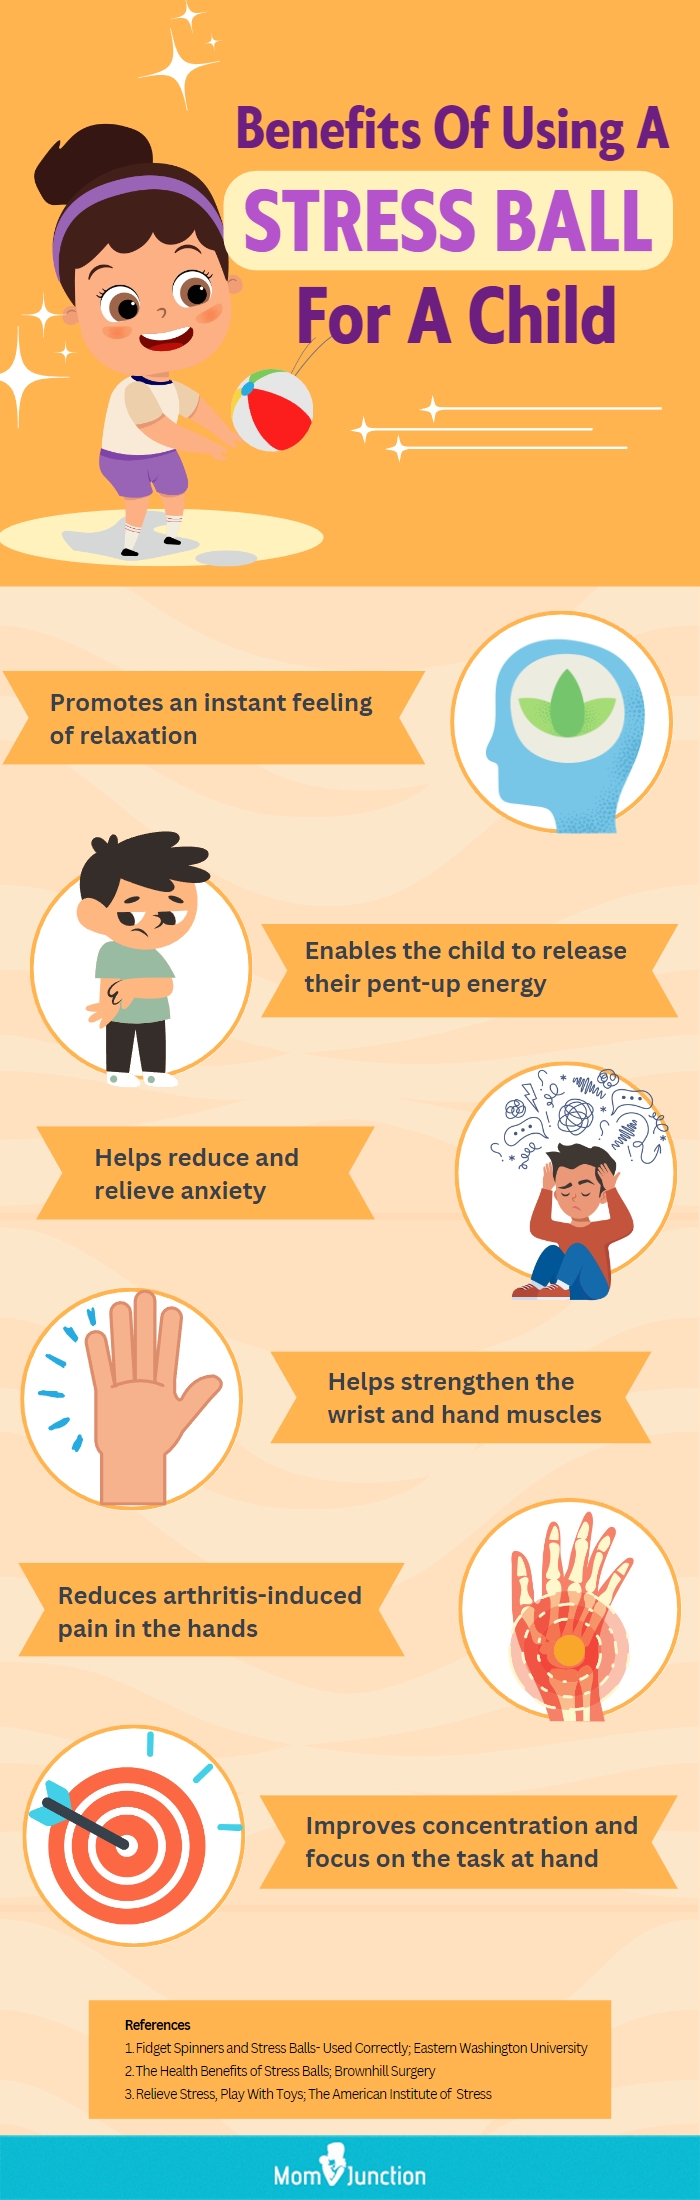 Benefits Of Using A Stress Ball For A Child (infographic)